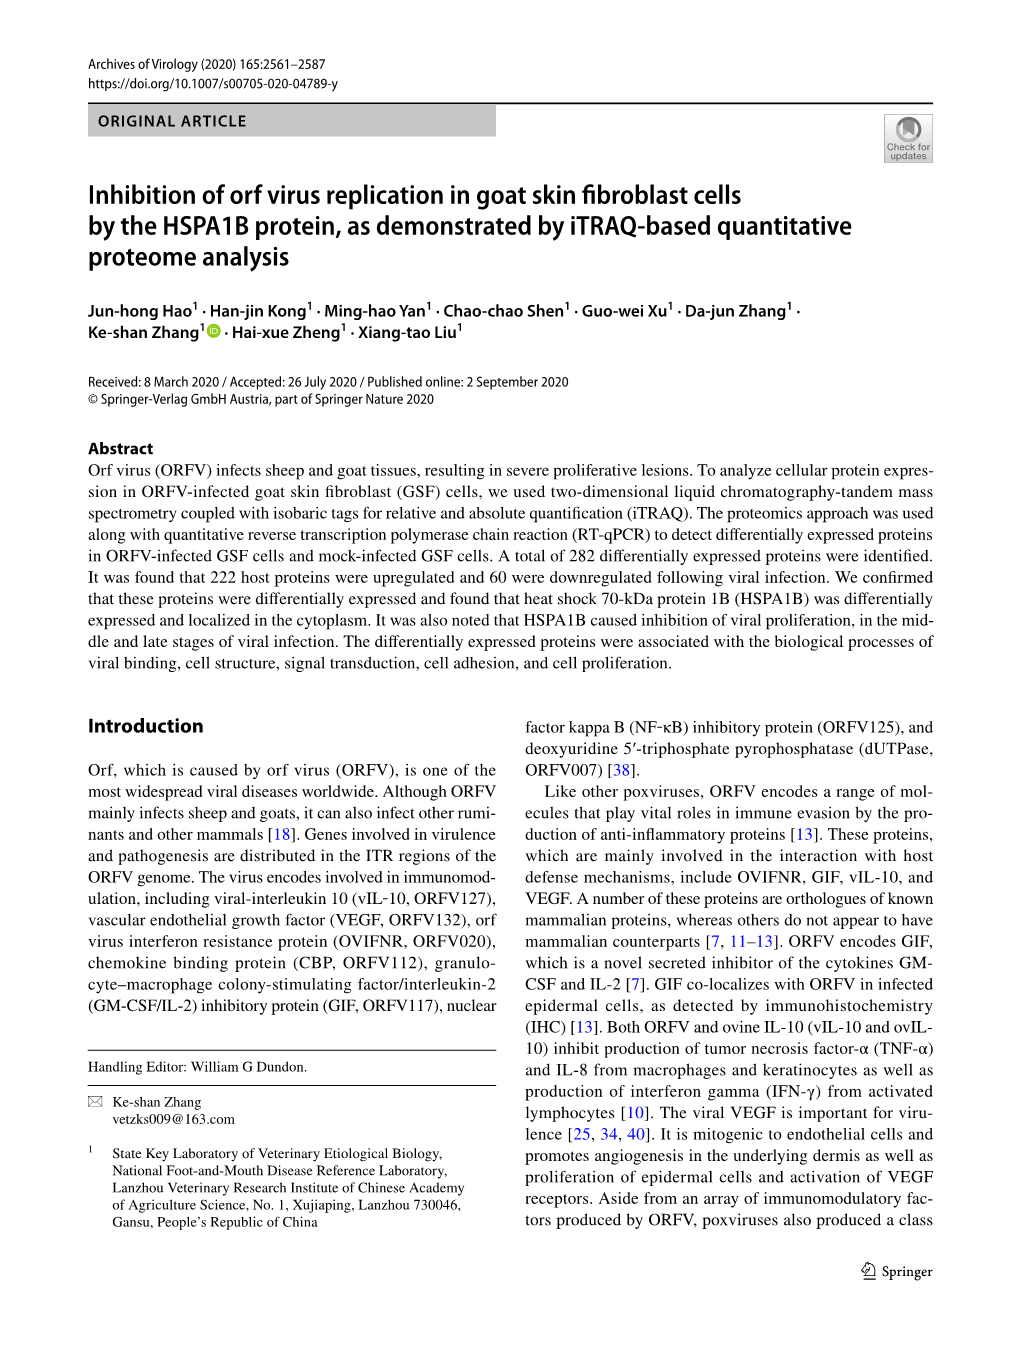 Inhibition of Orf Virus Replication in Goat Skin Fibroblast Cells by the HSPA1B